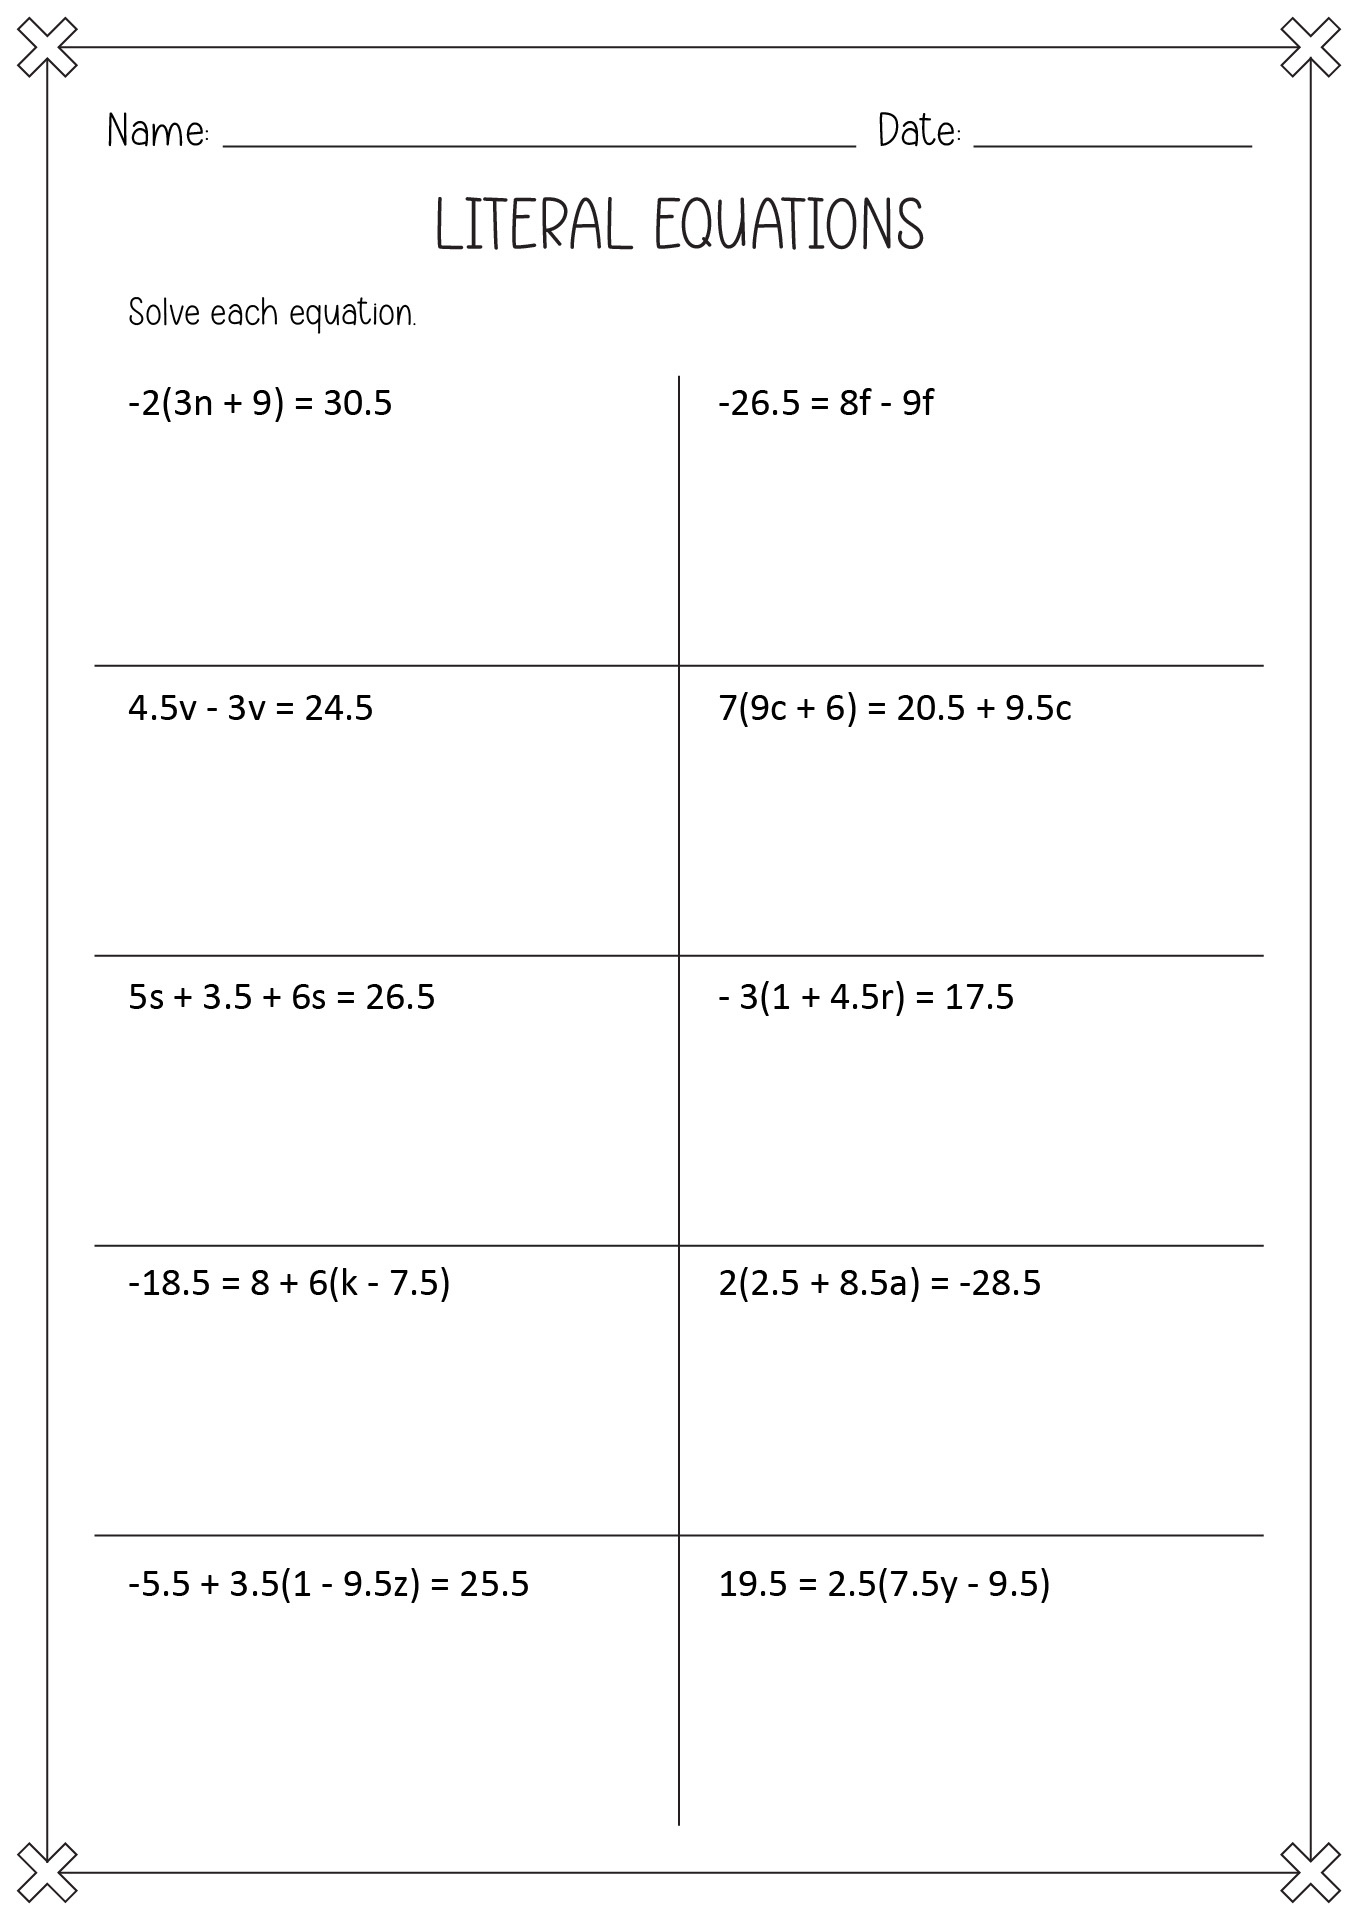 solving-one-step-equations-1-answer-key-cazesdesigns